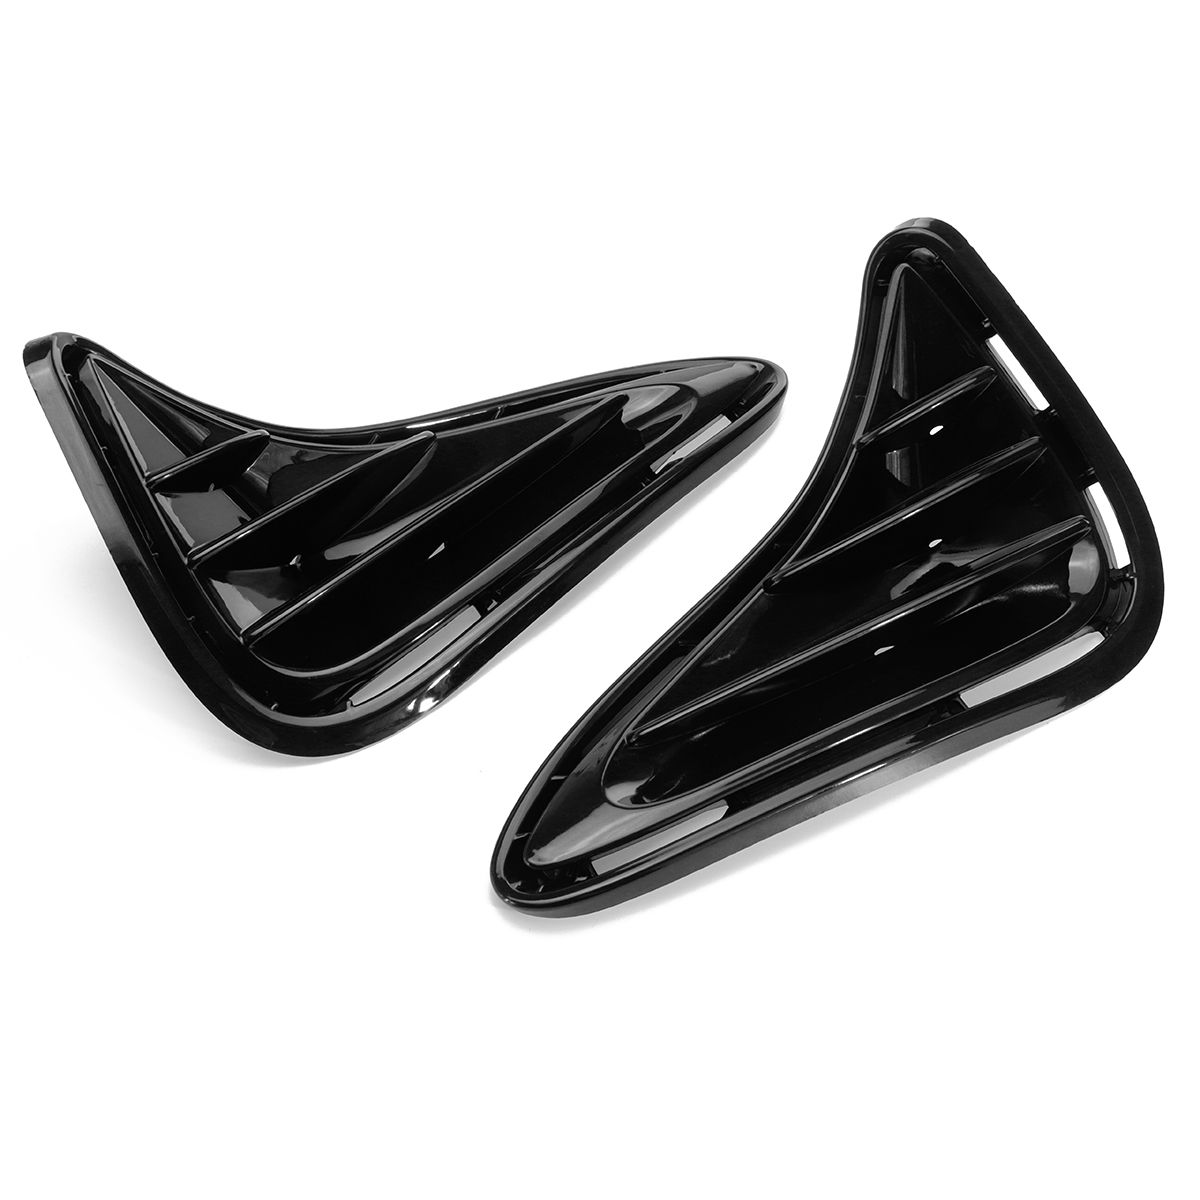 Fog-Light-Cover-Lamp-Bezels-Glossy-Black-Pair-for-Toyota-Corolla-L-LE-LE-Eco-2017-2019-1452974